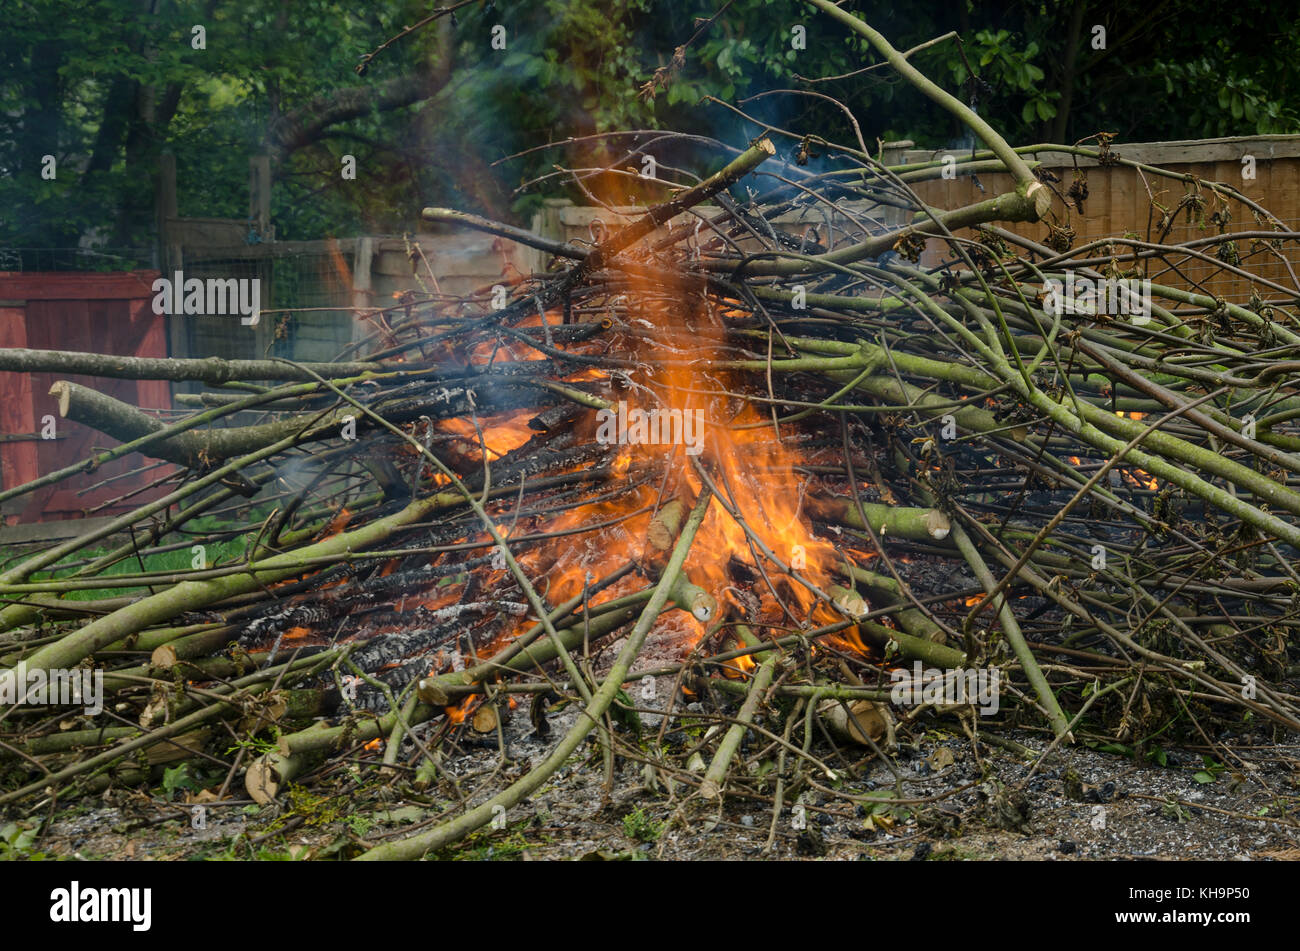 Gigantic pile of sycamore branches twigs starting to burn catch alight in back yard garden releasing trapped carbon back into atmosphere Stock Photo